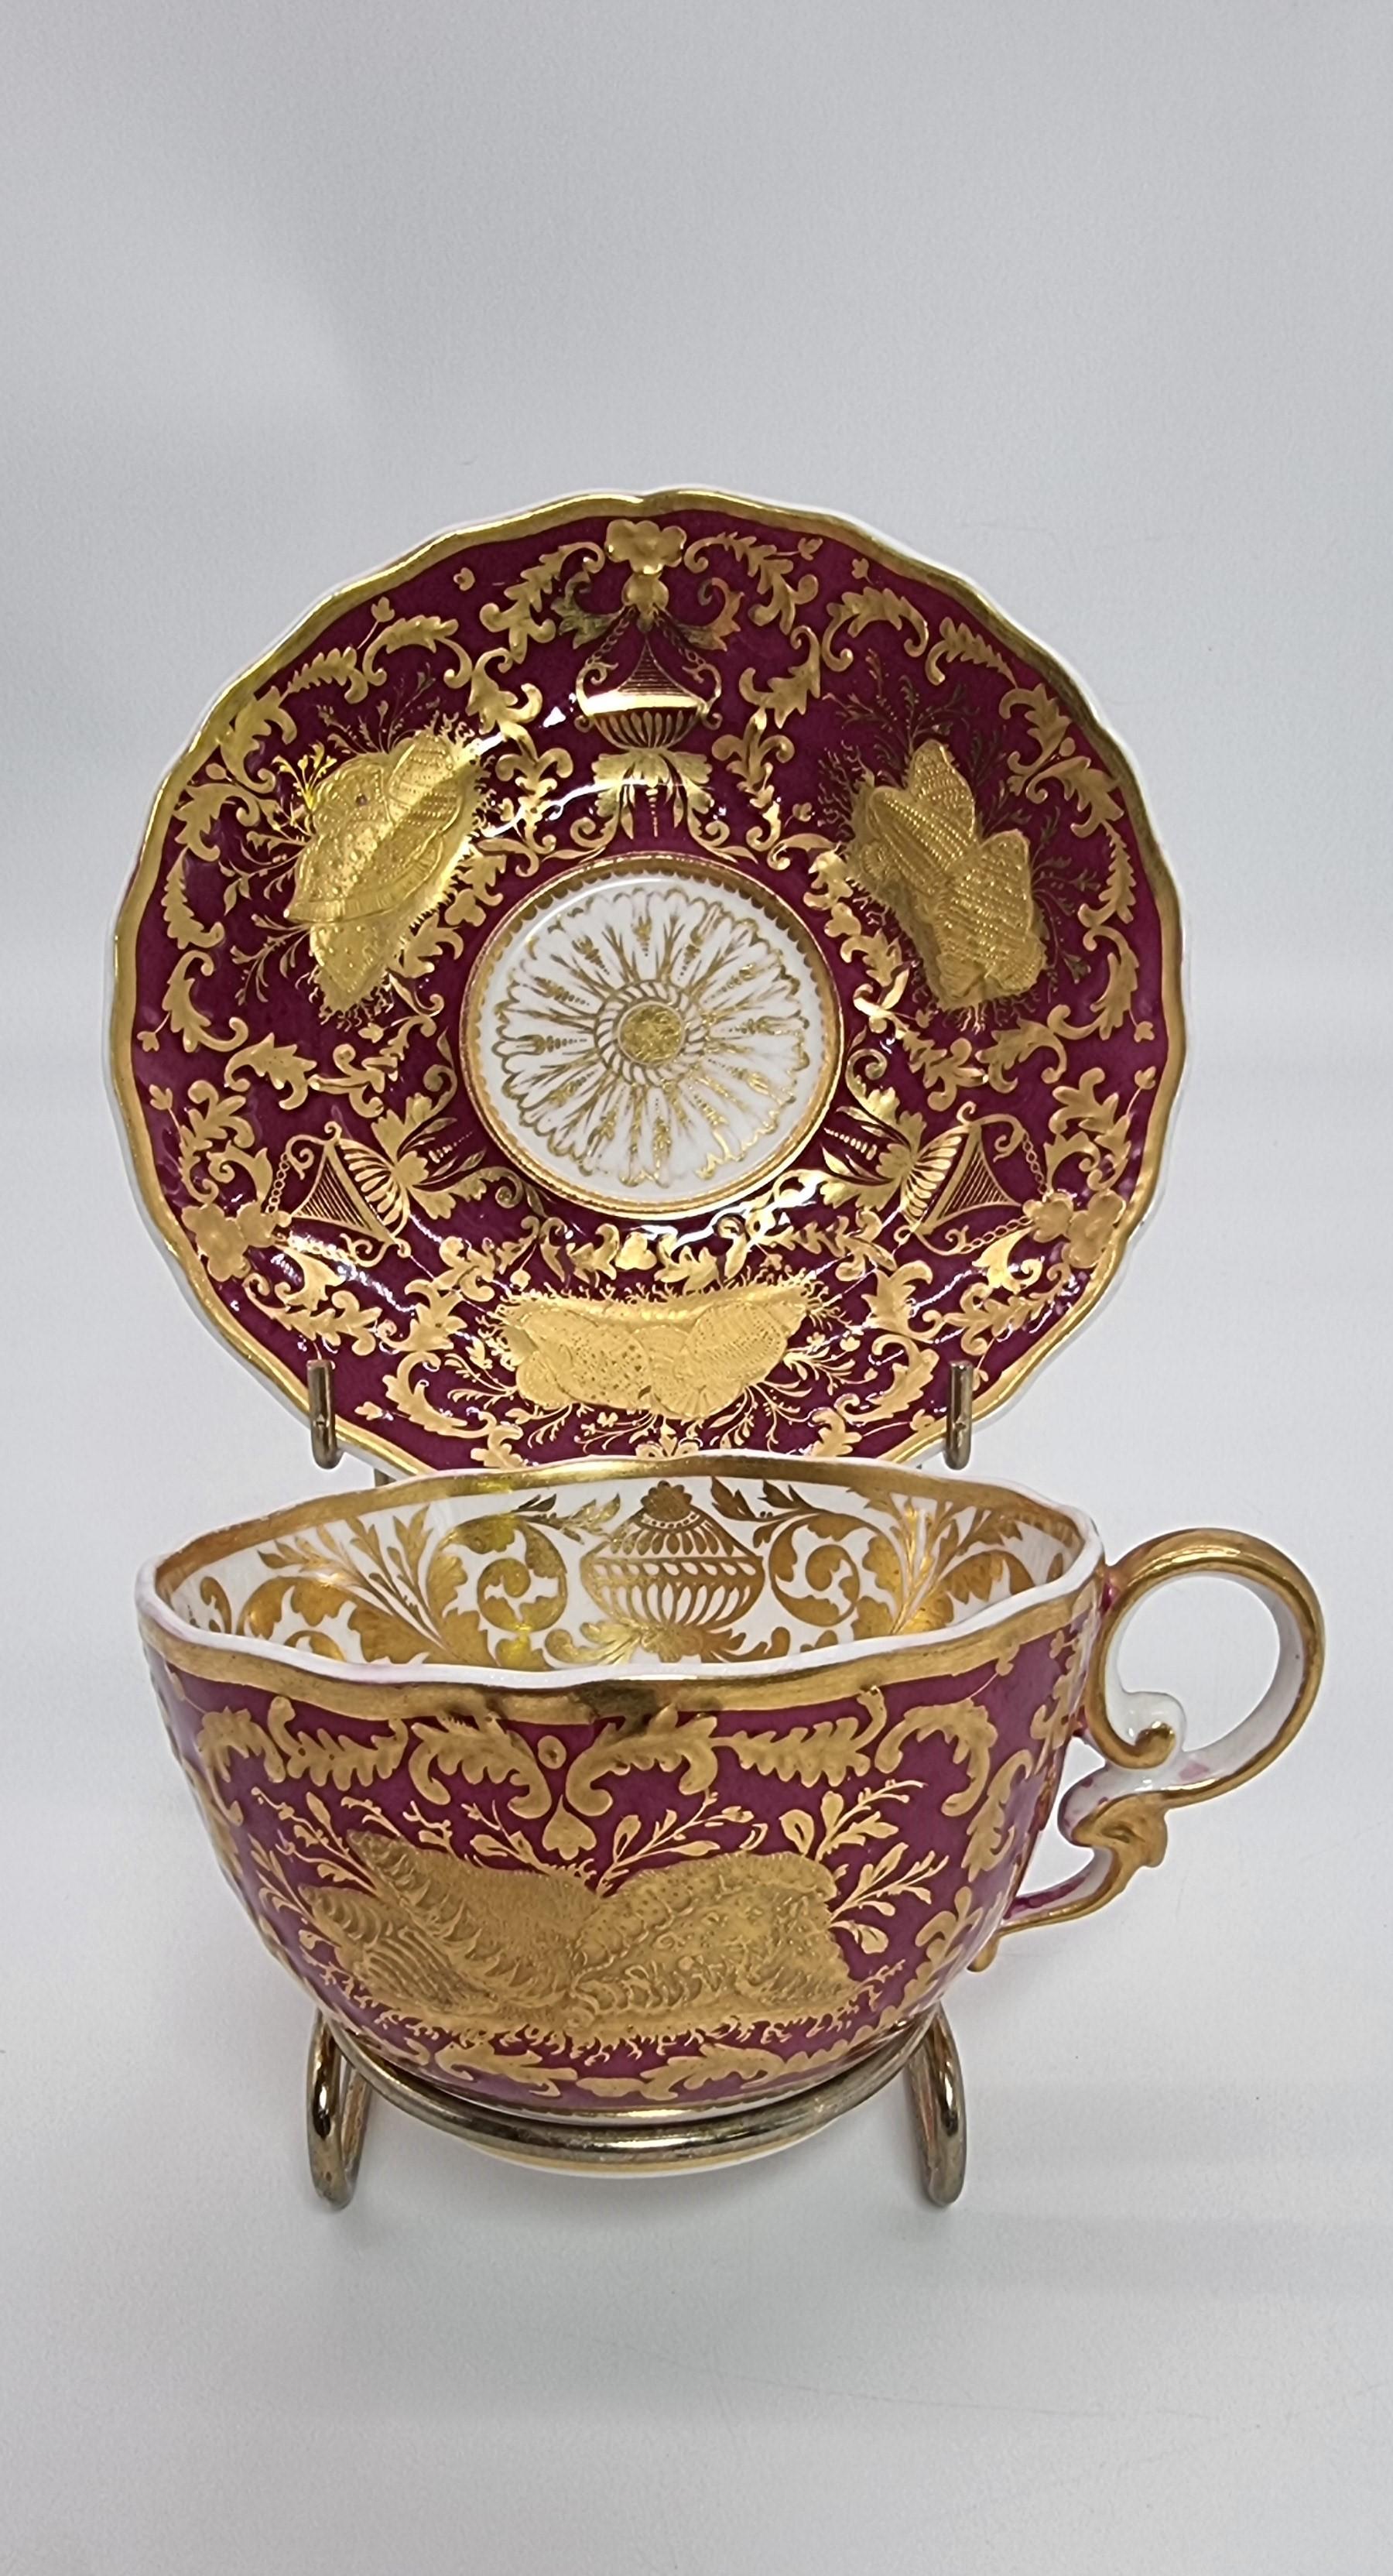 An exquisite and rare early 19t C Spode cabinet cup and saucer.
This beautiful and richly decorated Spode cabinet cup and saucer were made at this high quality English porcelain factory, Circa 1830.  It has a deep plum red ground with a white